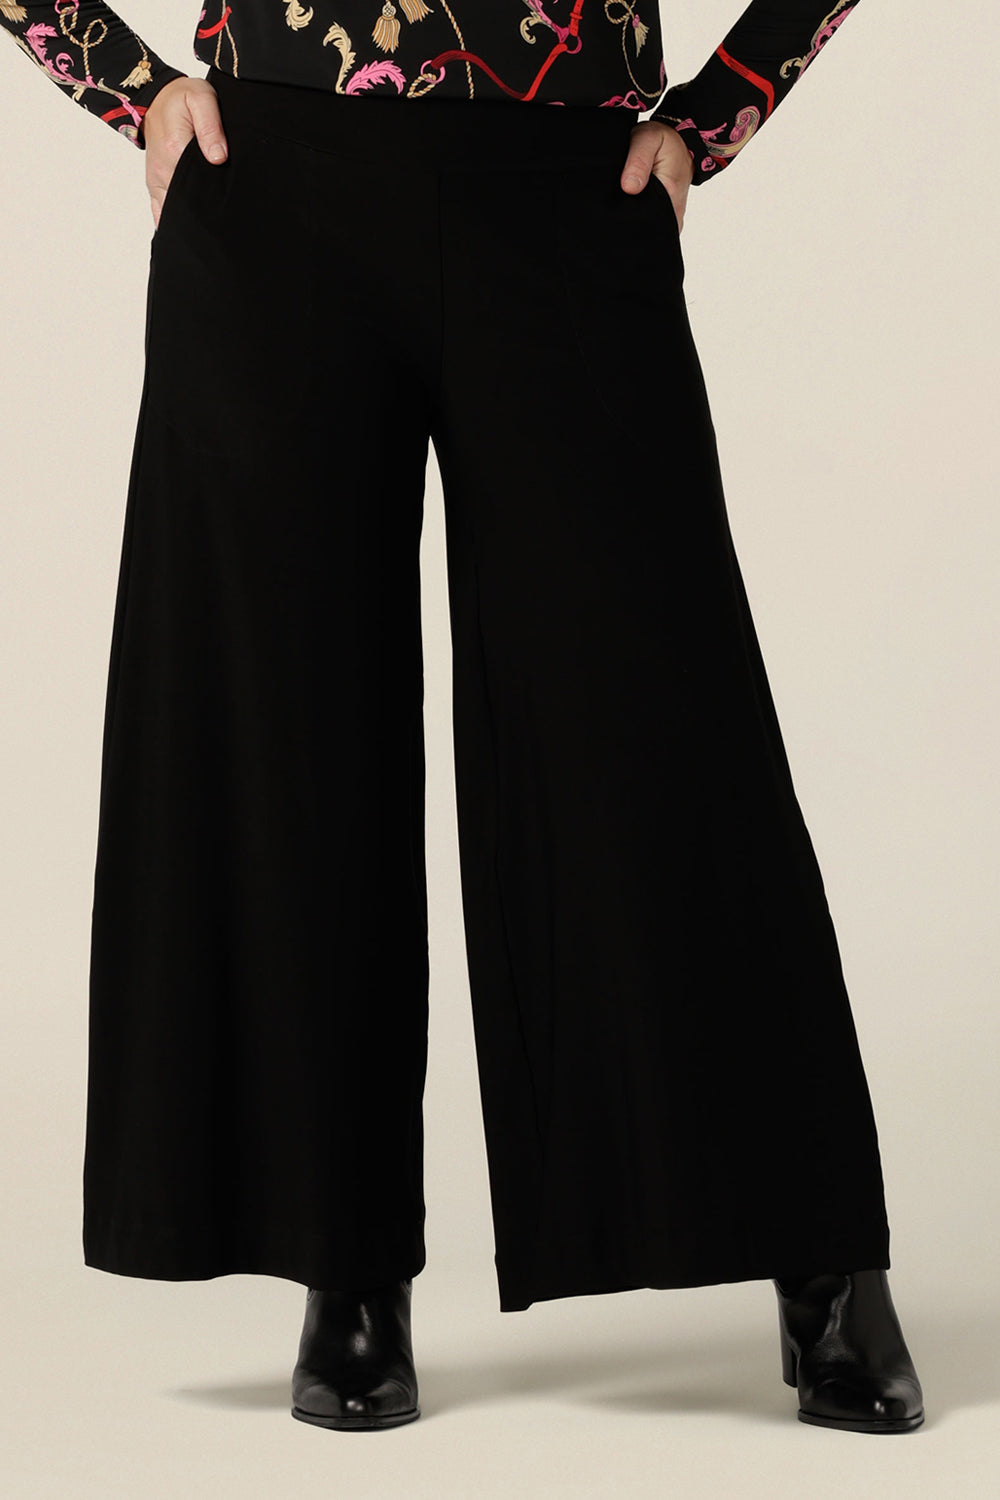 Black wide leg pants with pockets, shown in a size 10. These pull-on, easy care pants are comfortable for your everyday workwear capsule wardrobe. Shop these Australian-made black trousers online in sizes 8 to 24, petite to plus sizes.